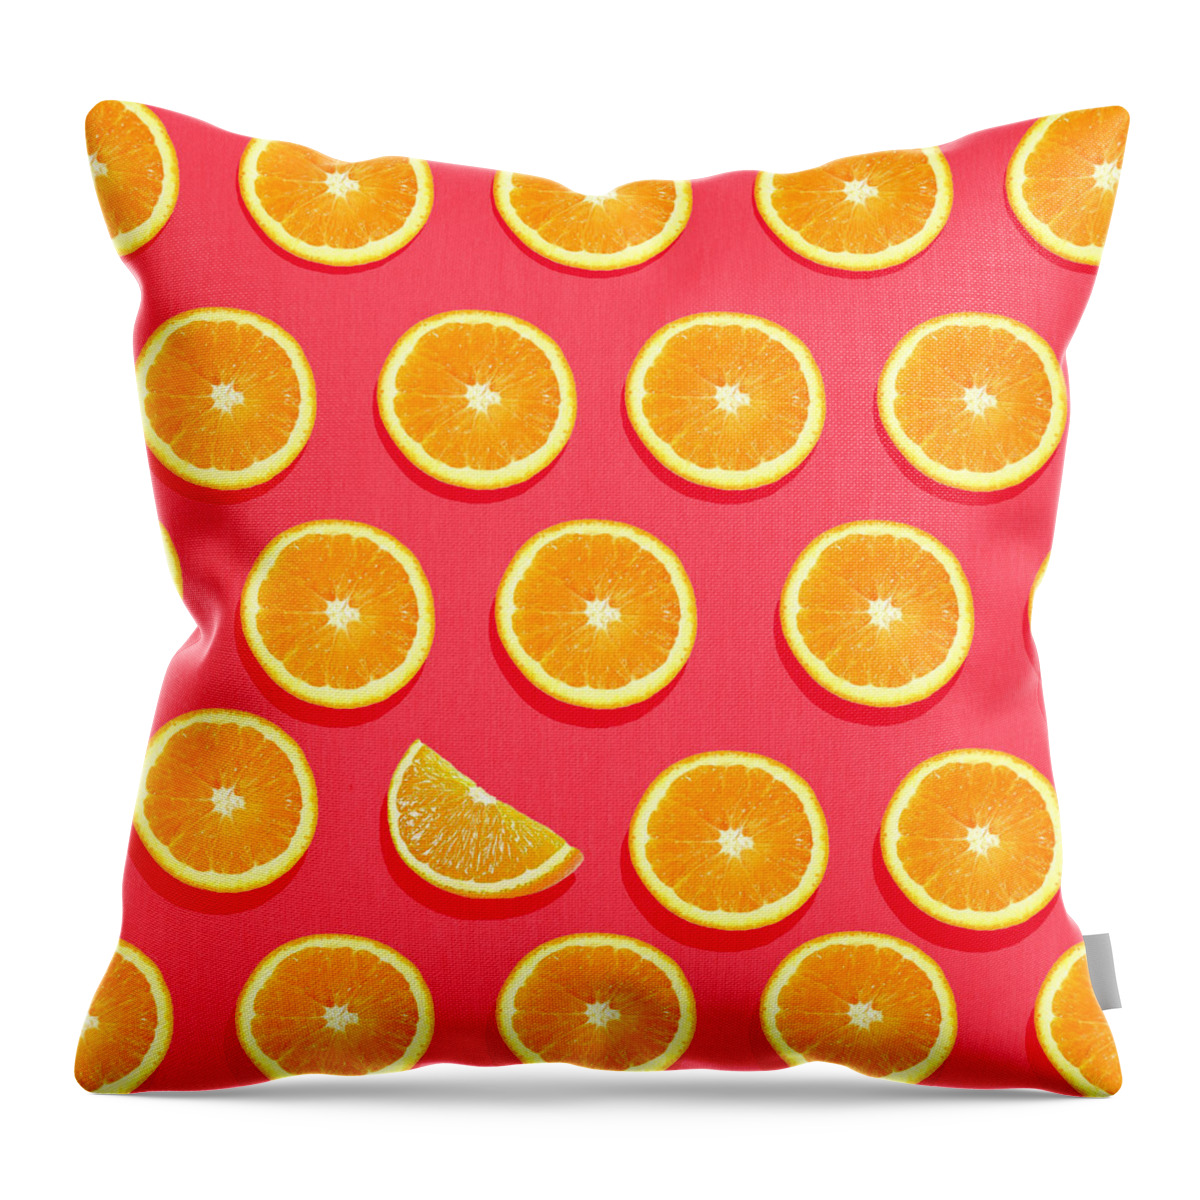 Abstract Throw Pillow featuring the painting Fruit 2 by Mark Ashkenazi